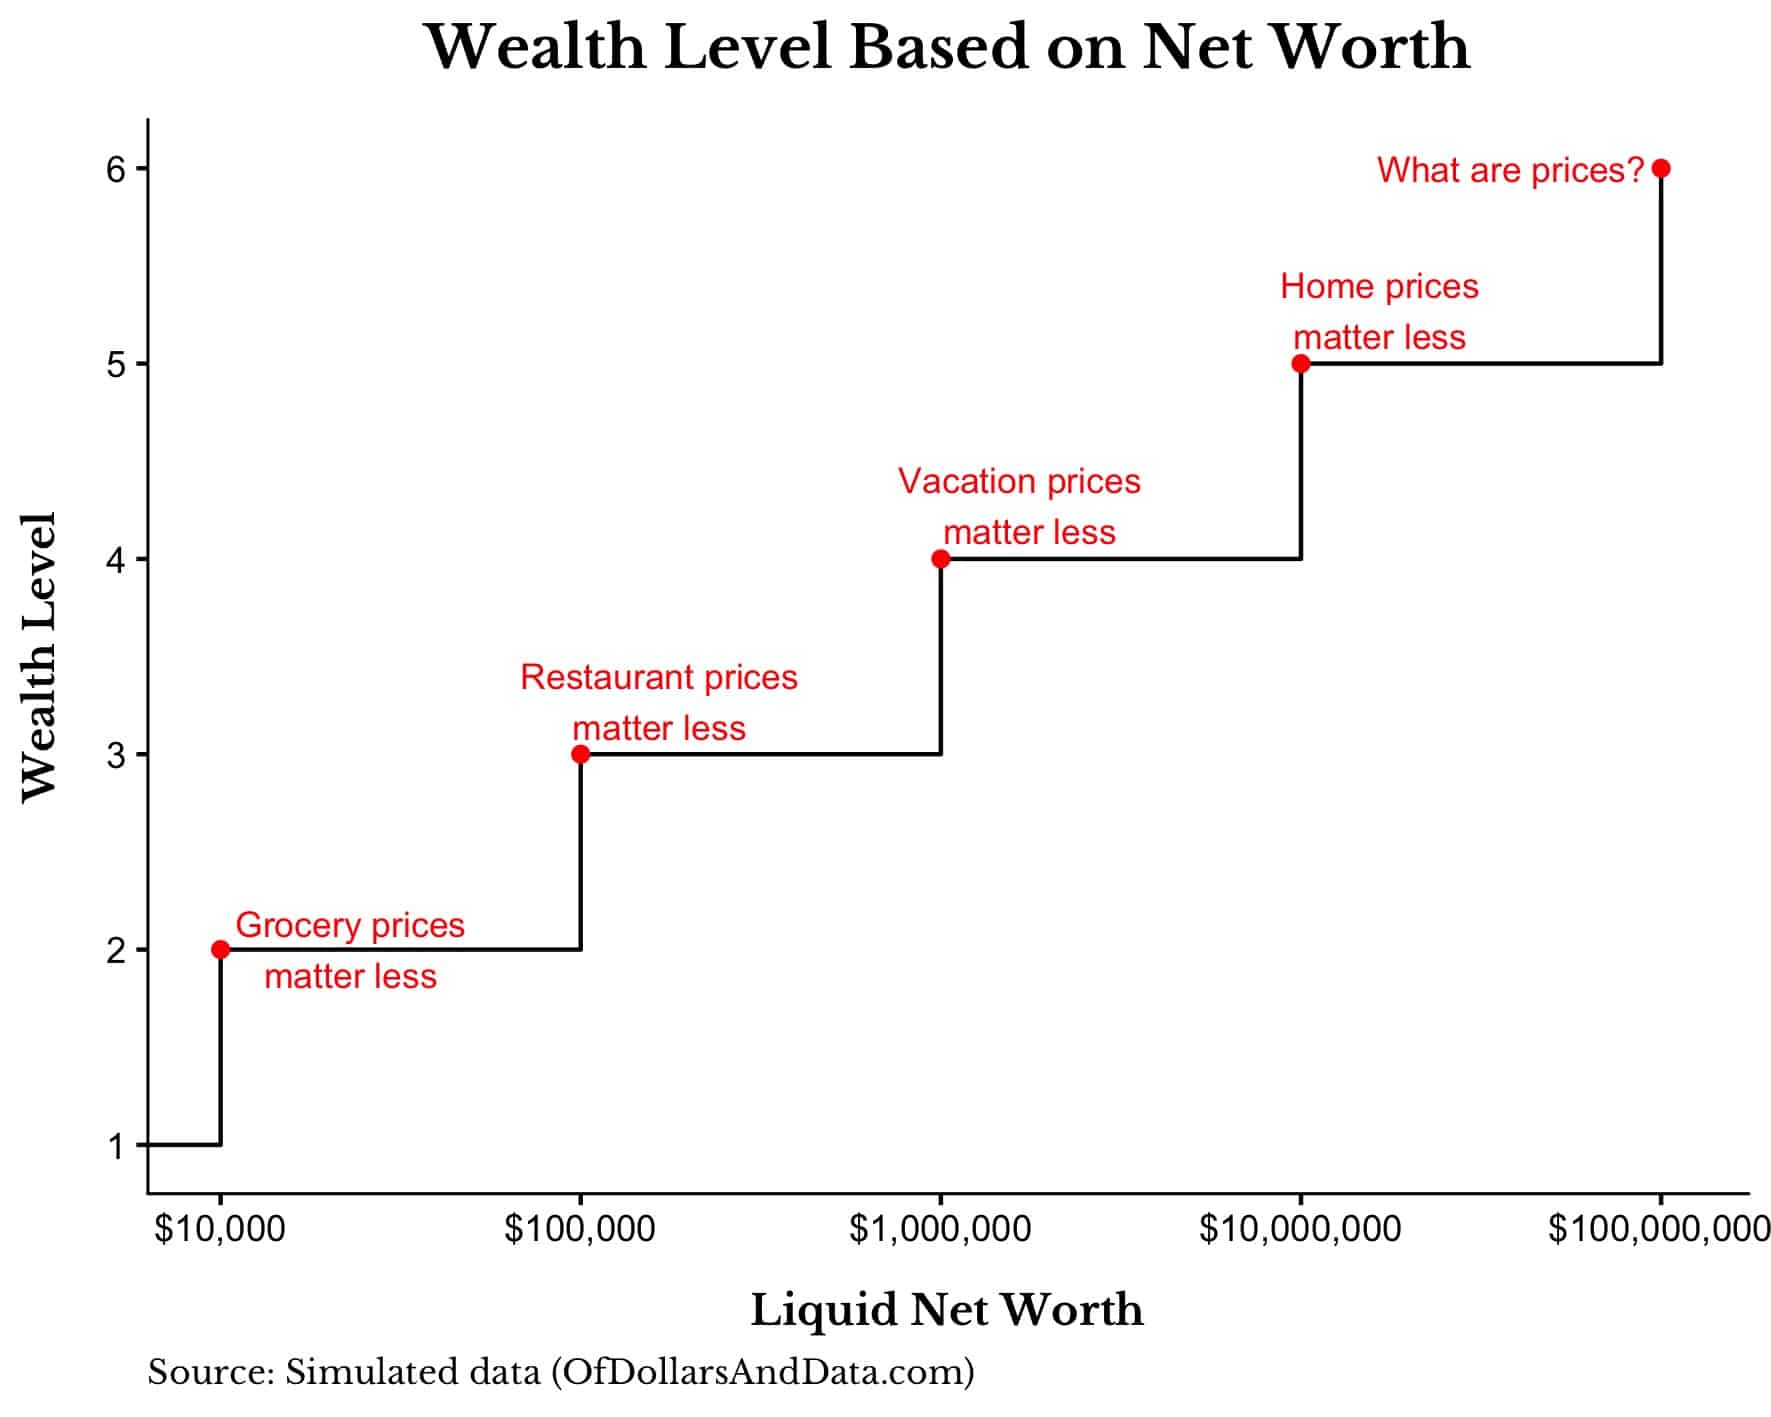 The wealth ladder which plots wealth level against liquid net worth (on a log scale)